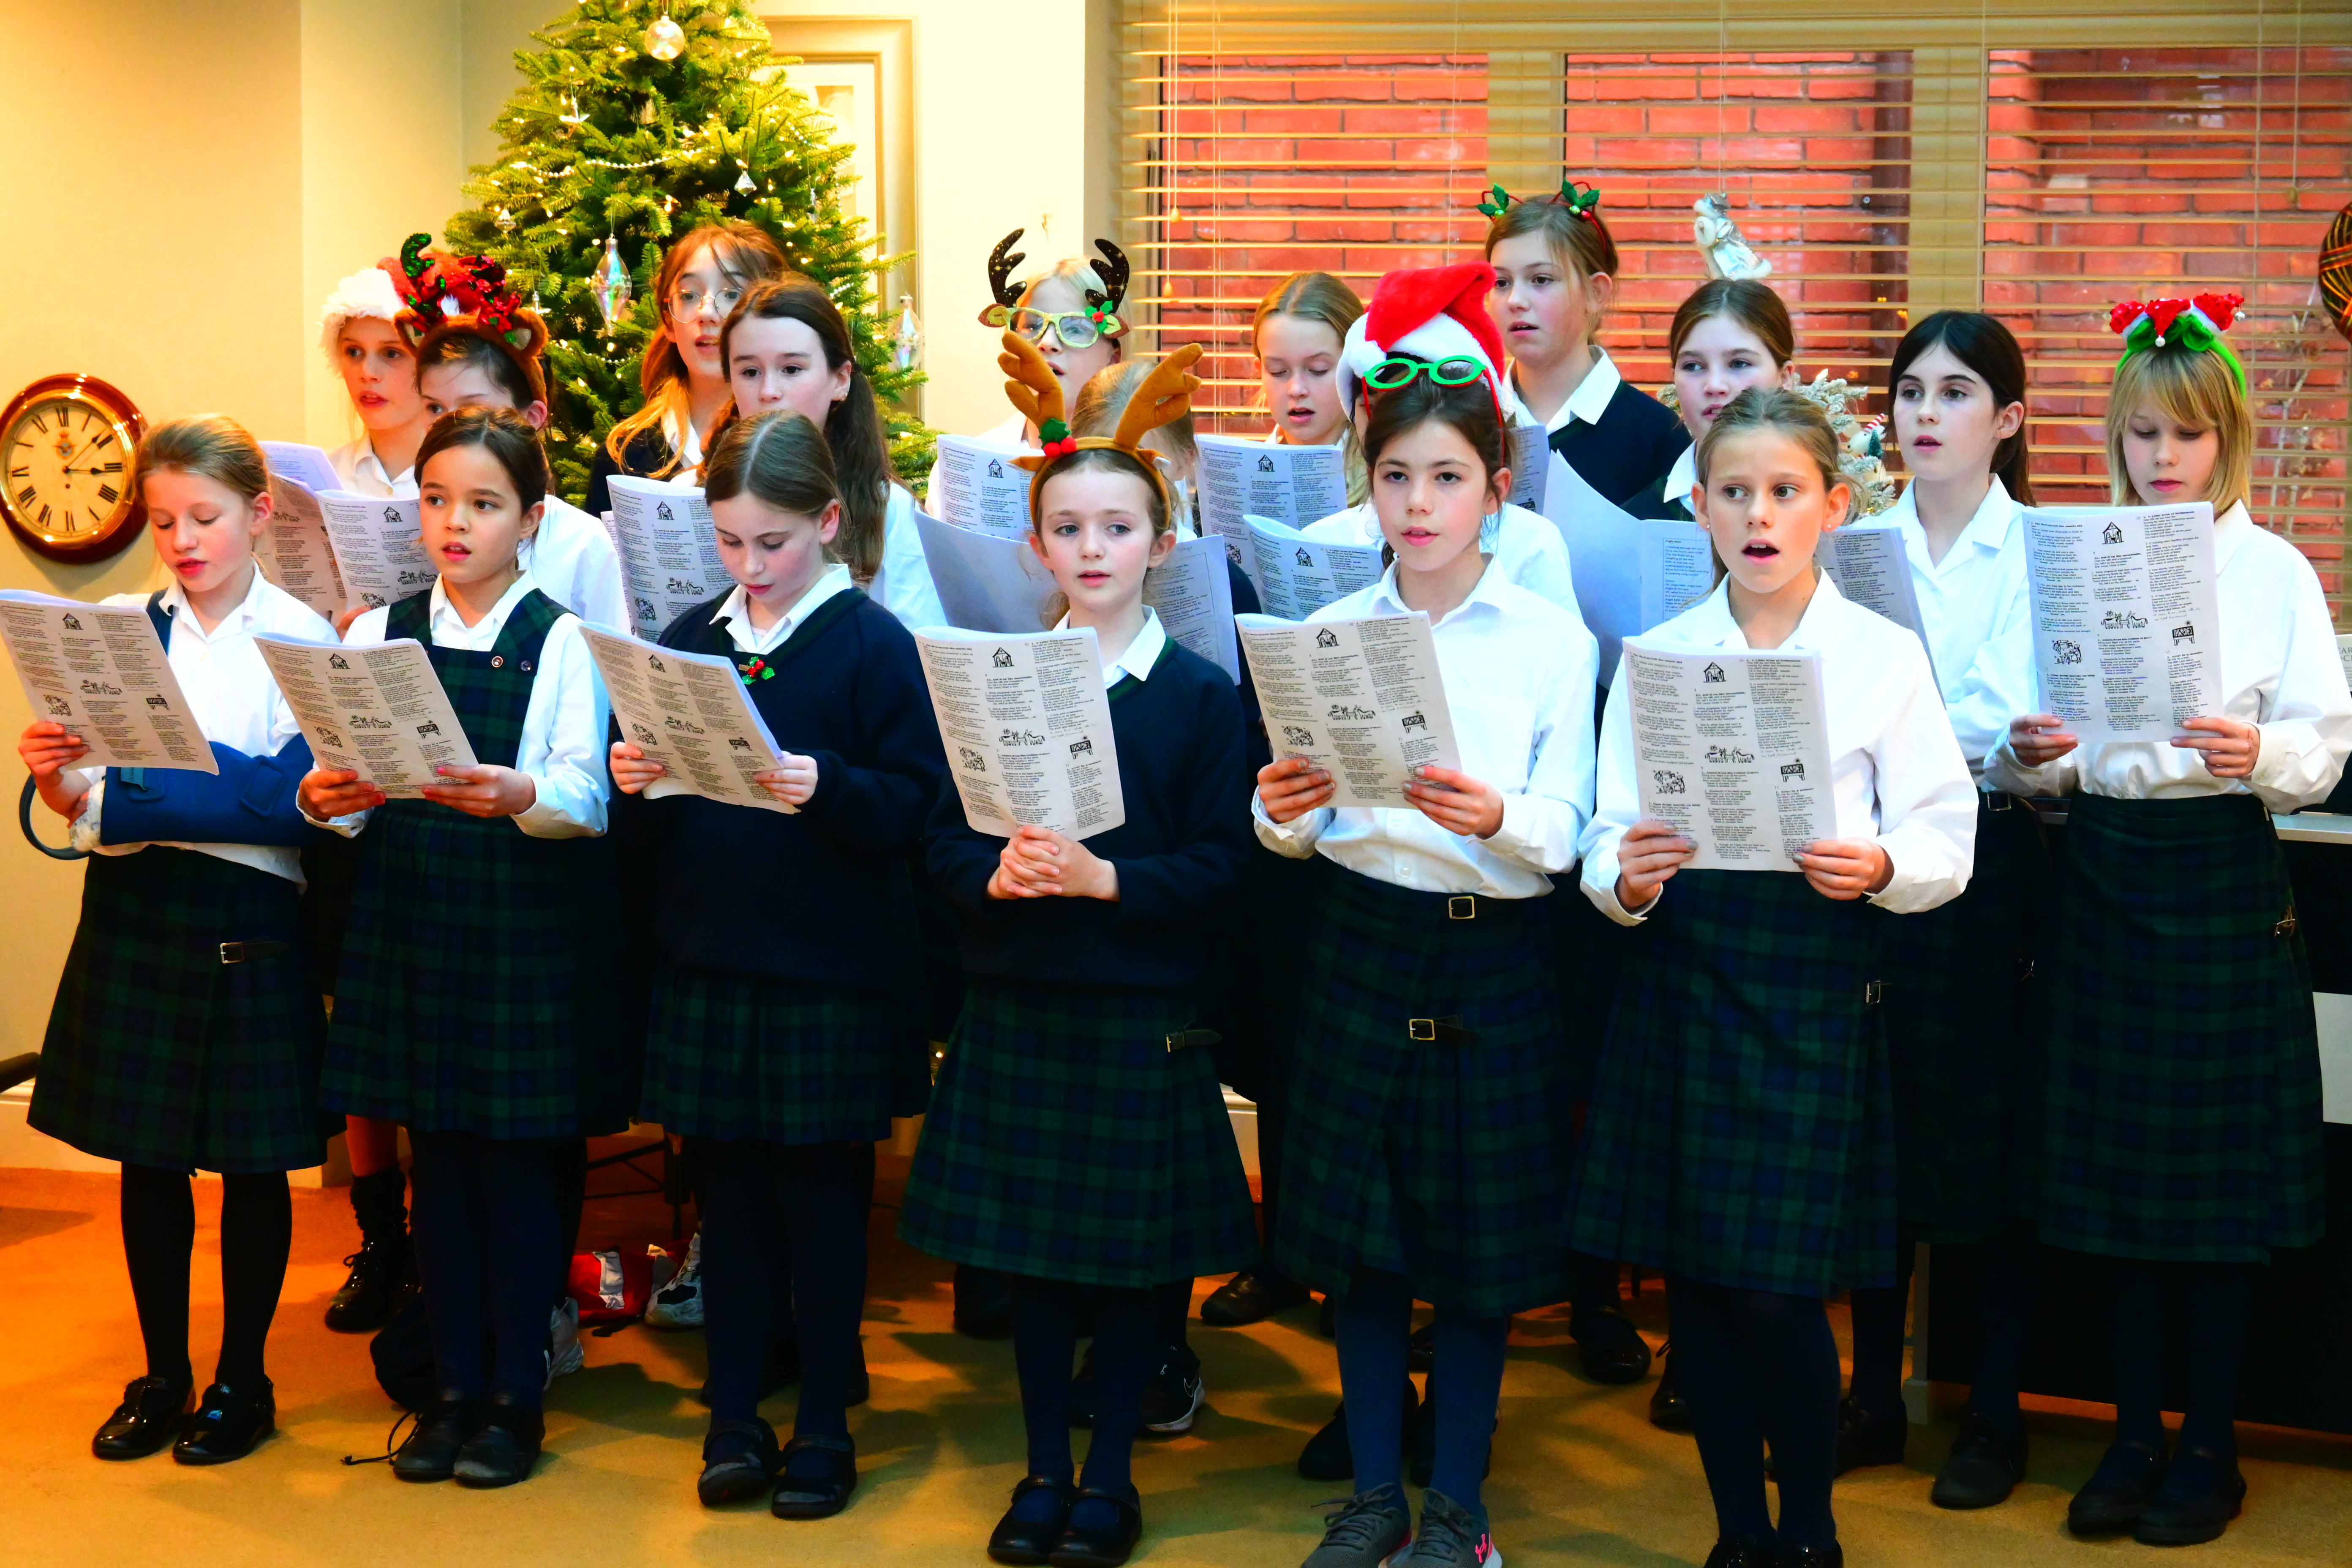 Group of girls singing with Christmas accessories